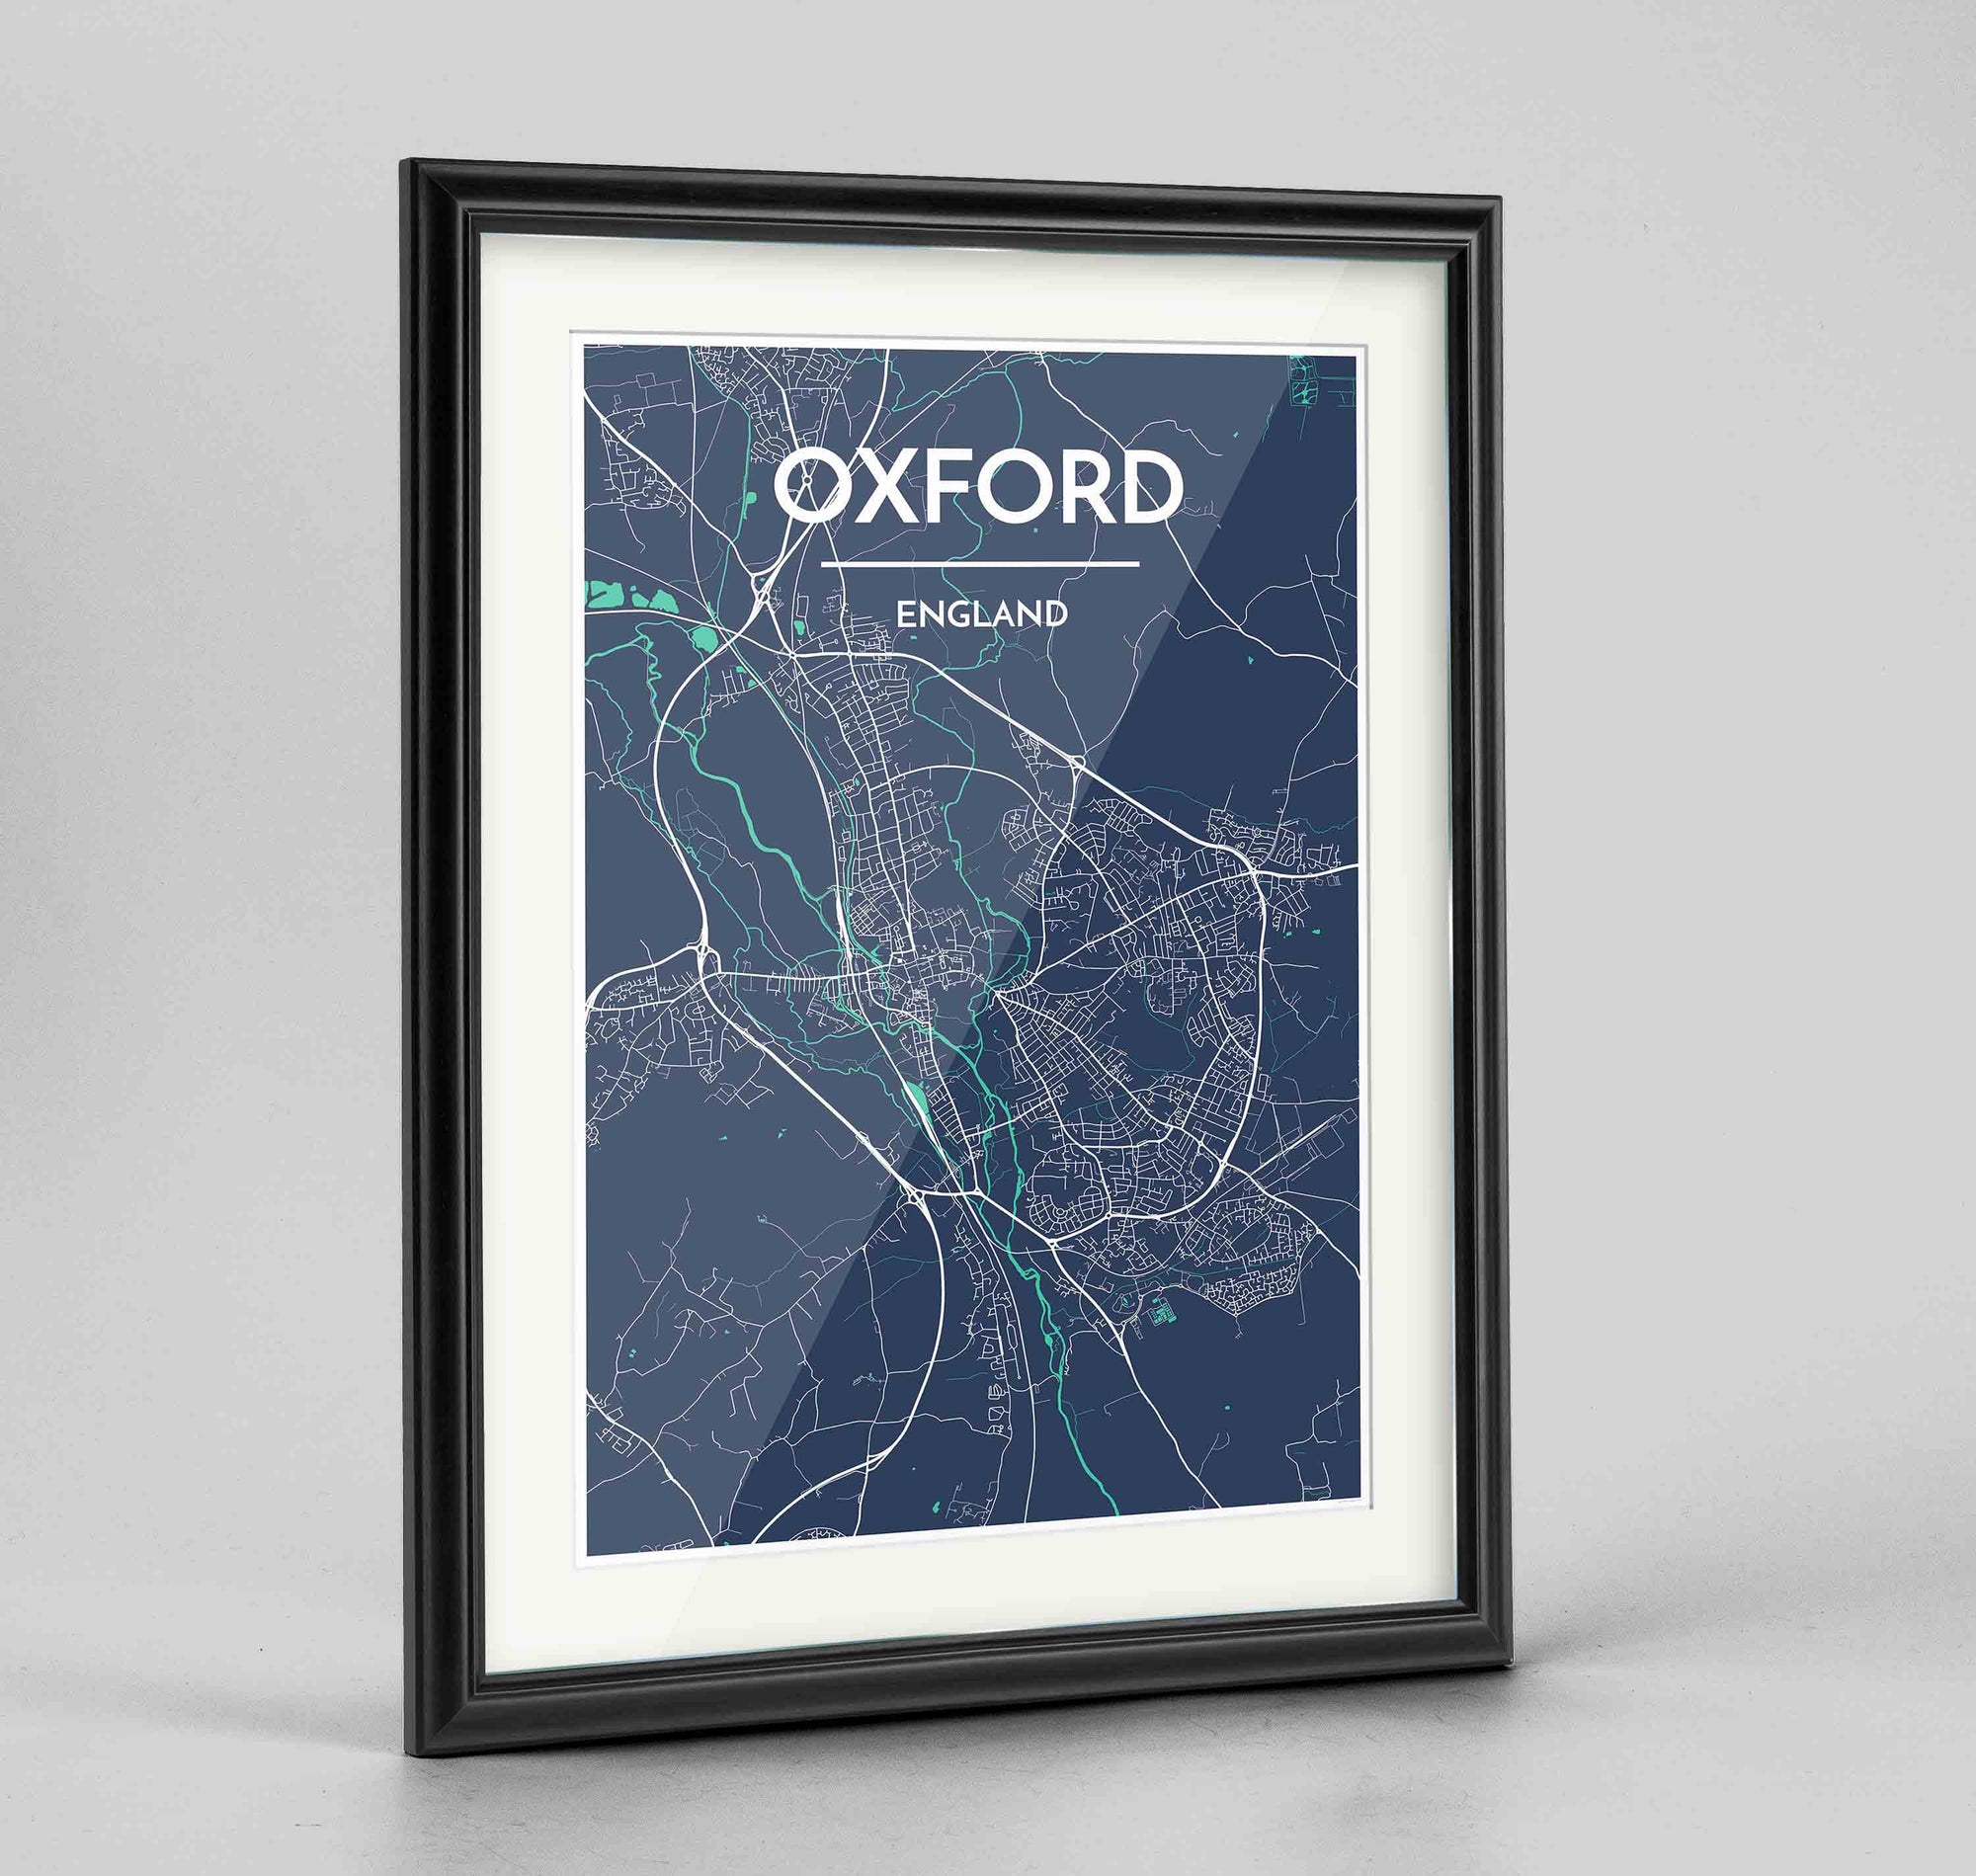 Framed Oxford Map Art Print 24x36" Traditional Black frame Point Two Design Group